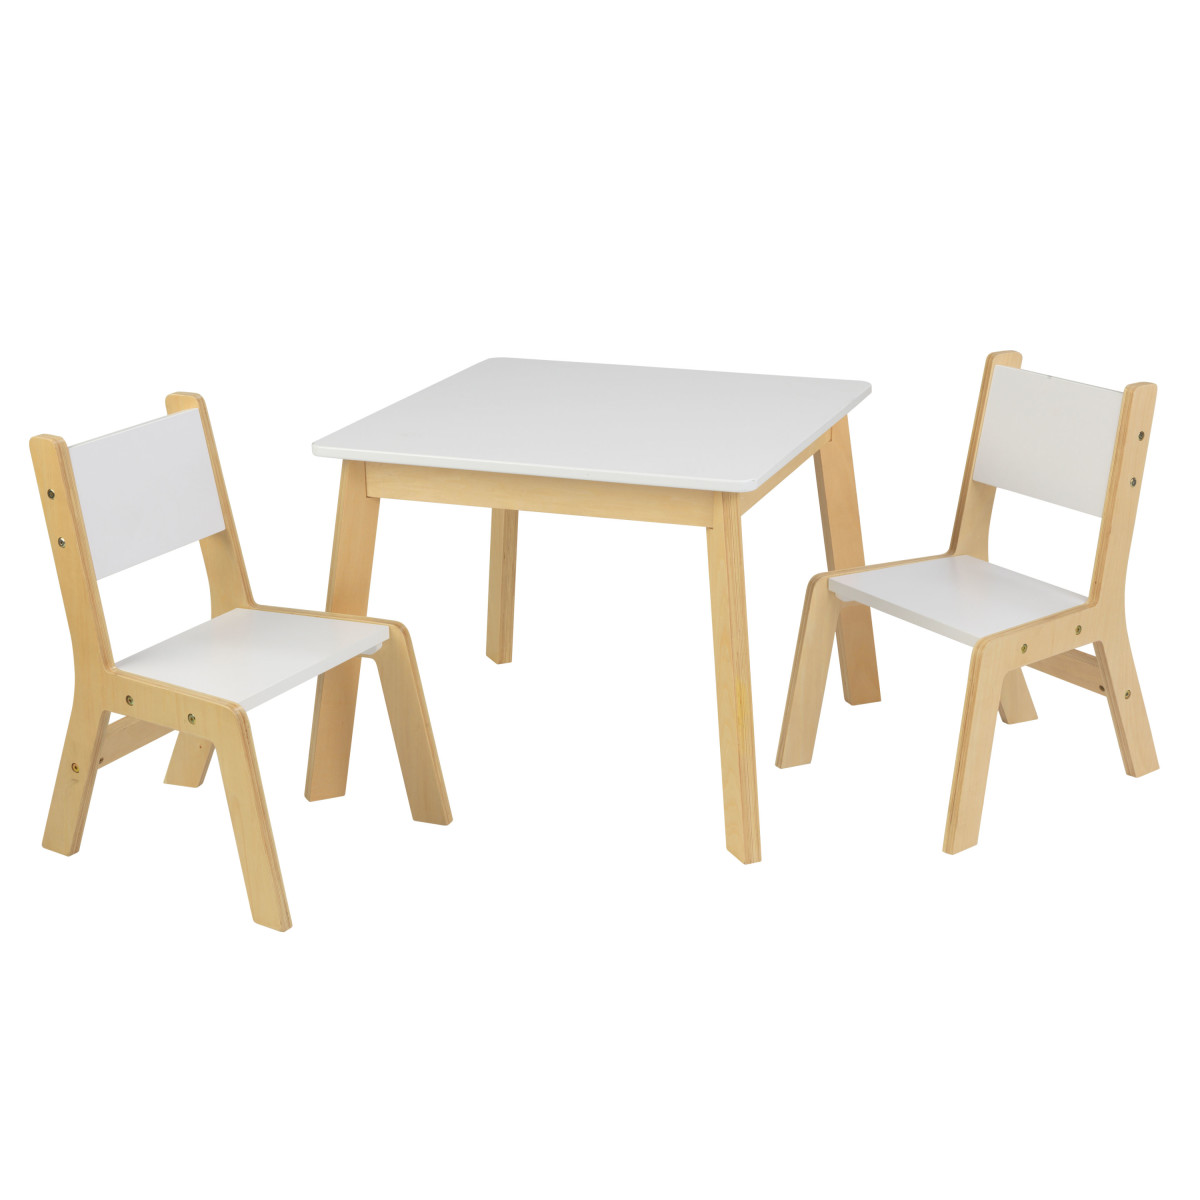 Kidkraft Modern Table And 2 Chairs Set 27025 Pirum Wooden Toys